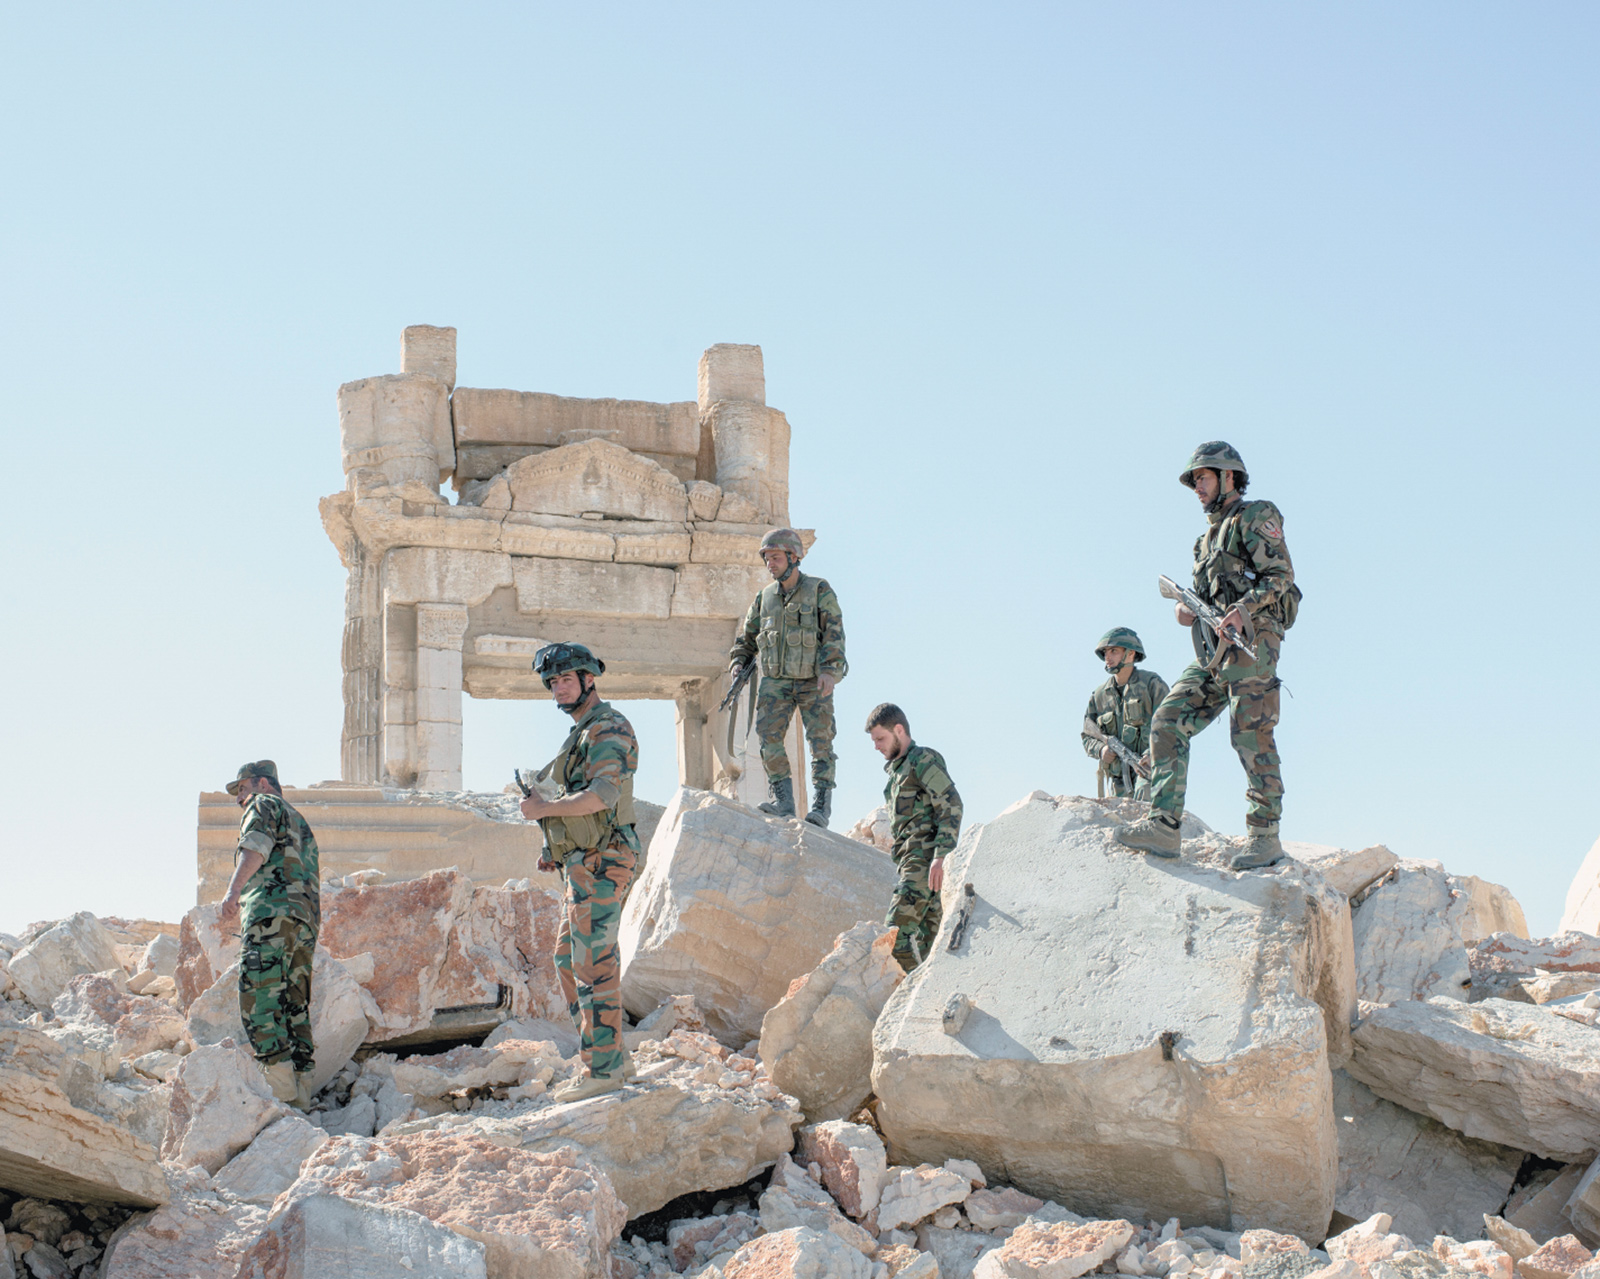 Syrian Army soldiers at the ruins of the destroyed Temple of Bel after retaking the ancient city of Palmyra from Islamic State militants, April 2016